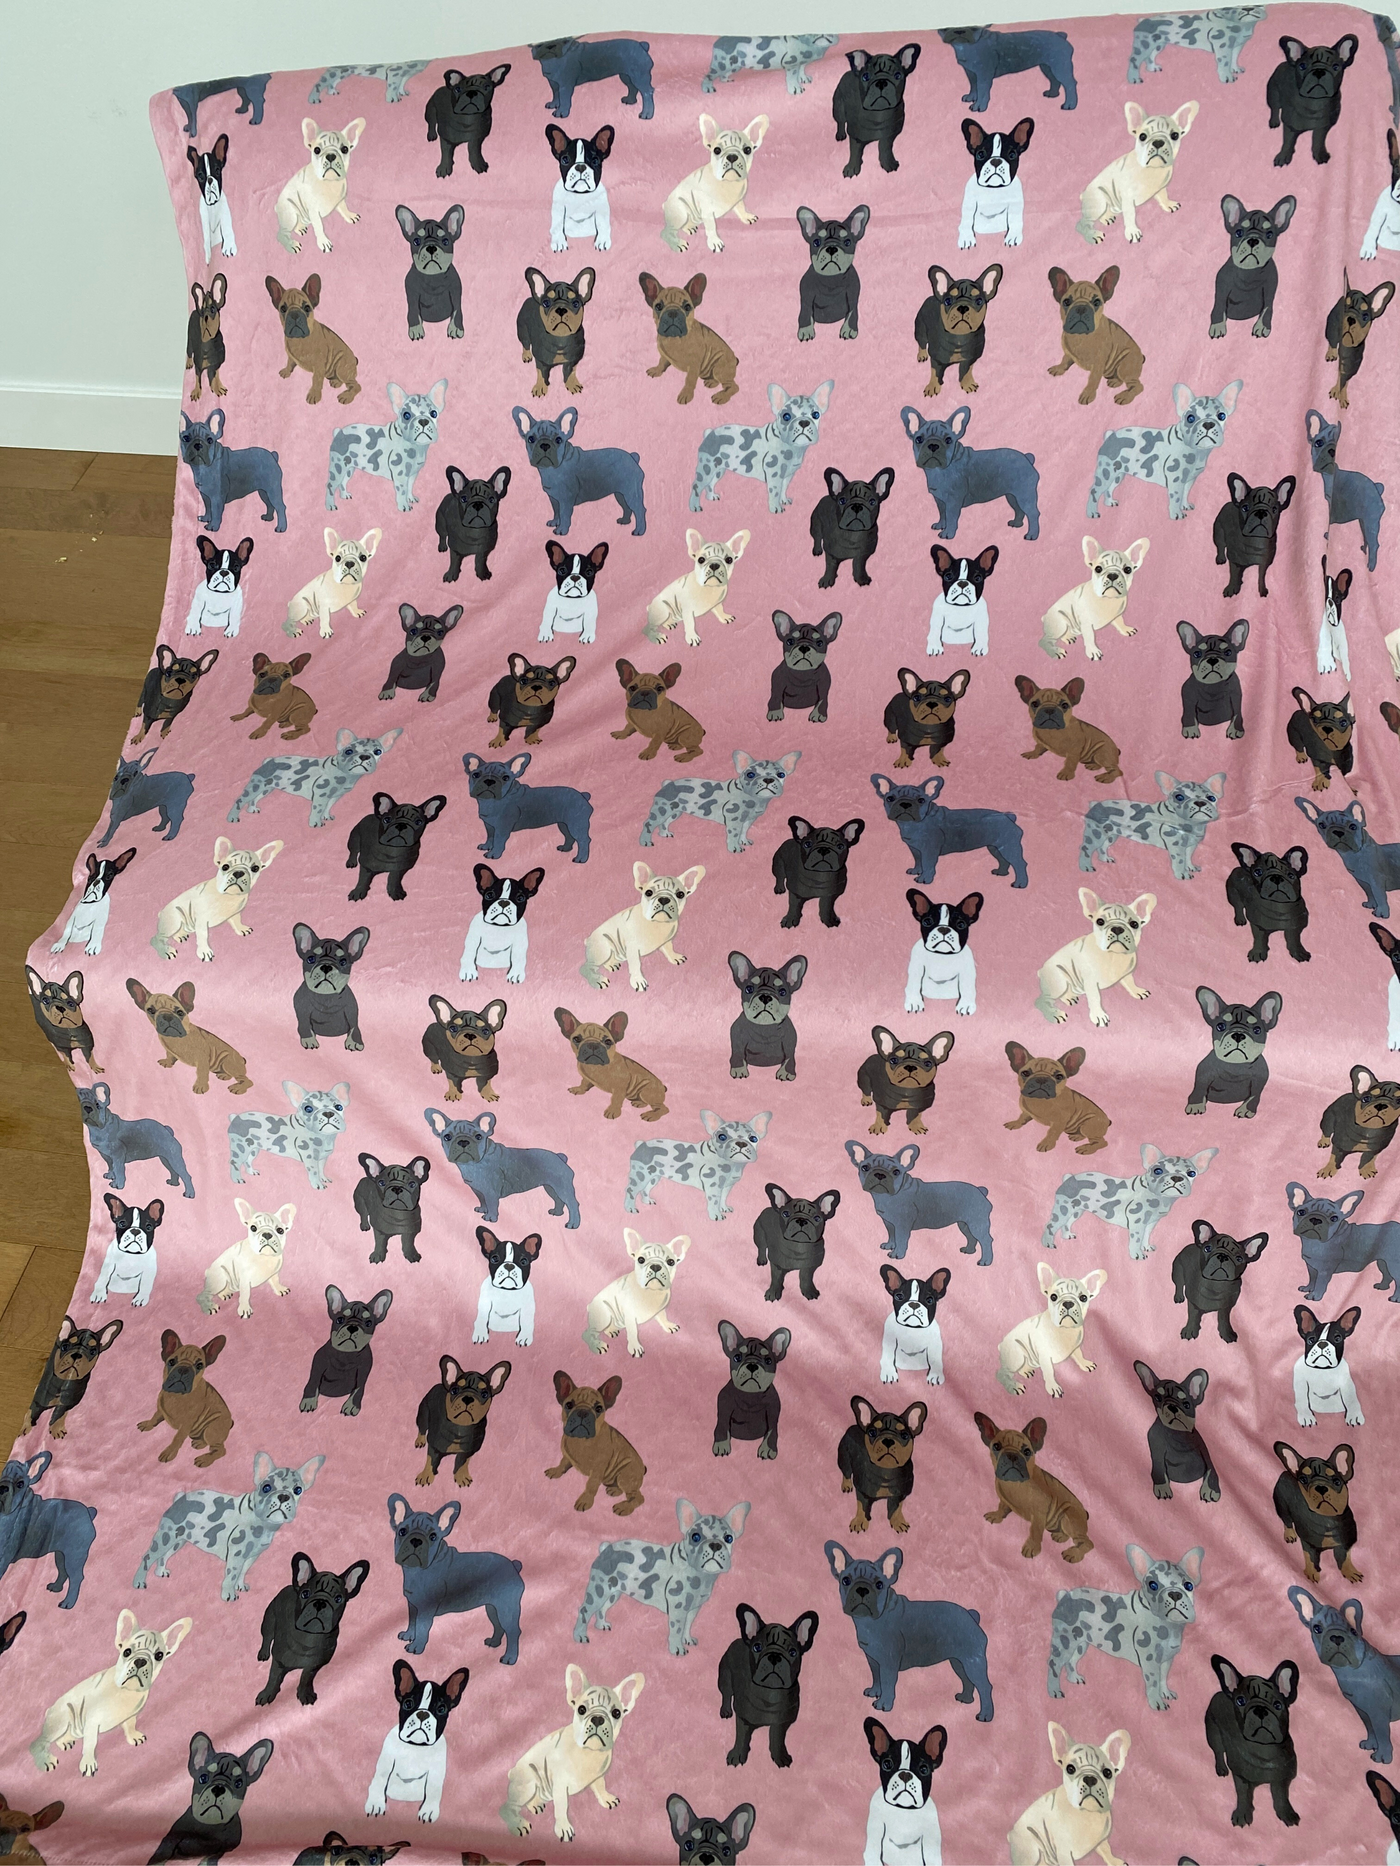 Giant Blanket: French Bulldog Party (Pink)